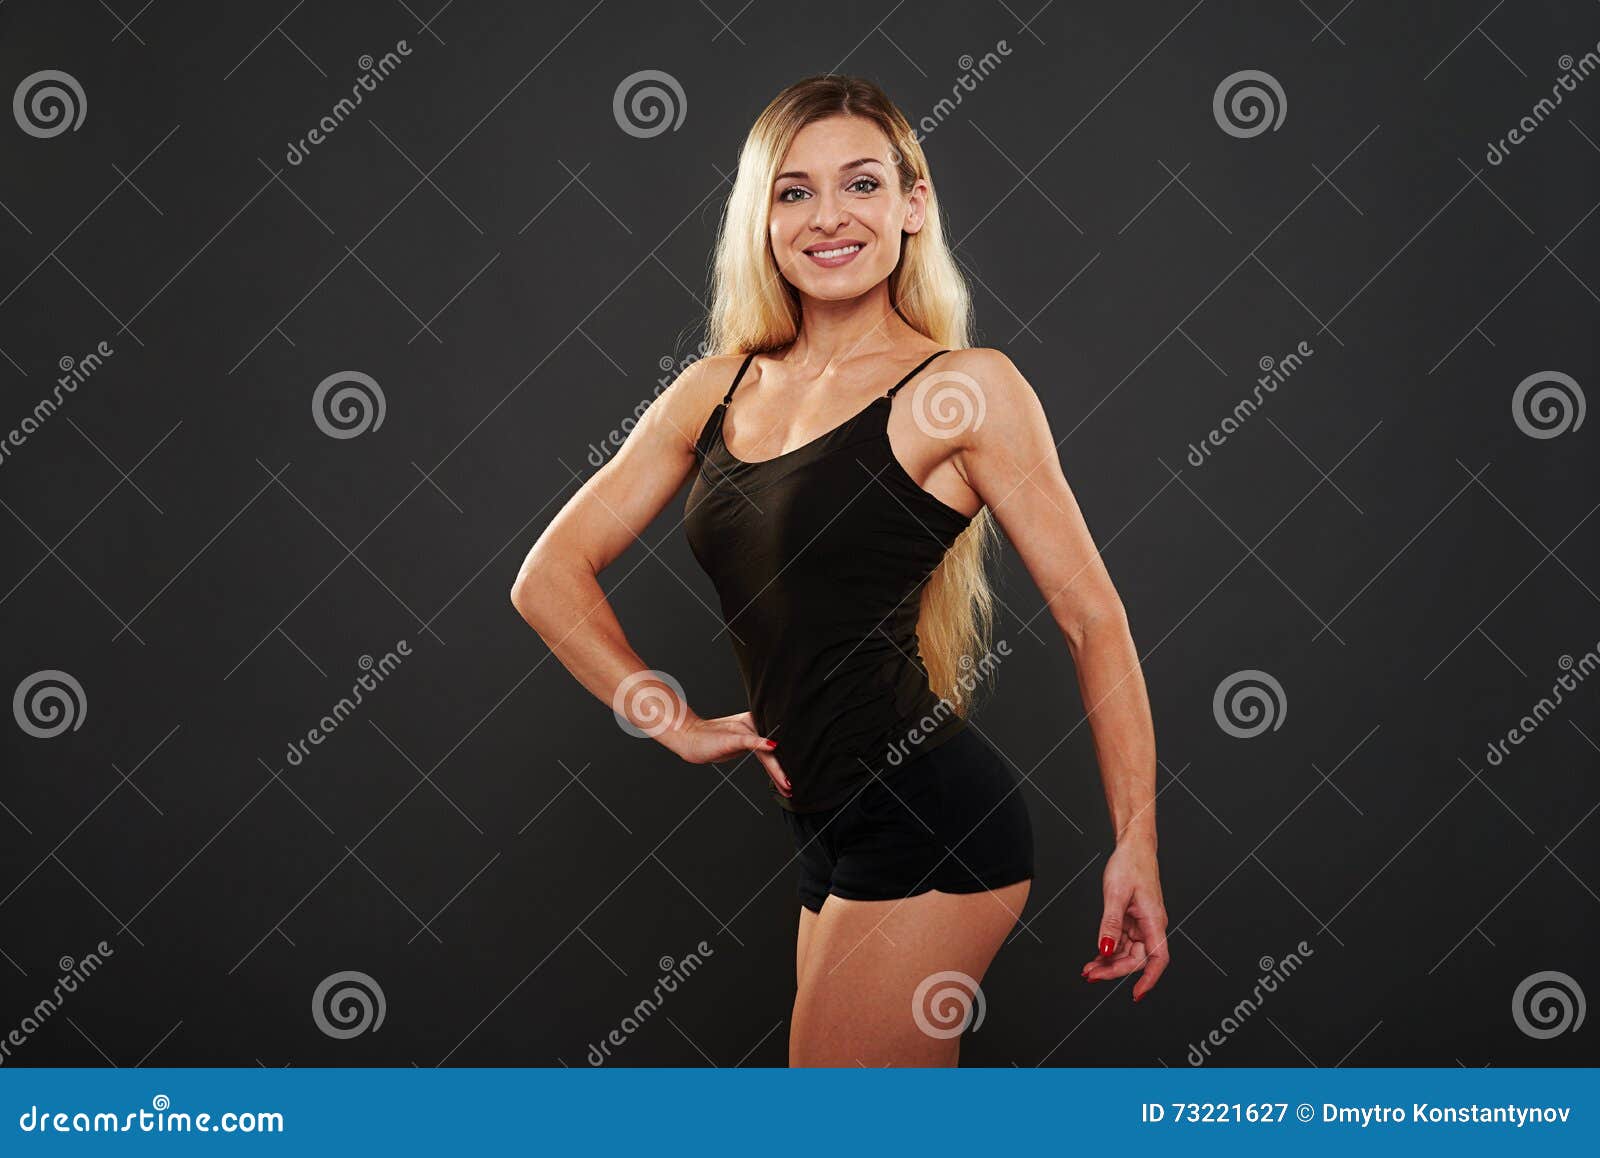 Slim Woman With Well Trained Body Over Black Background Stock Image